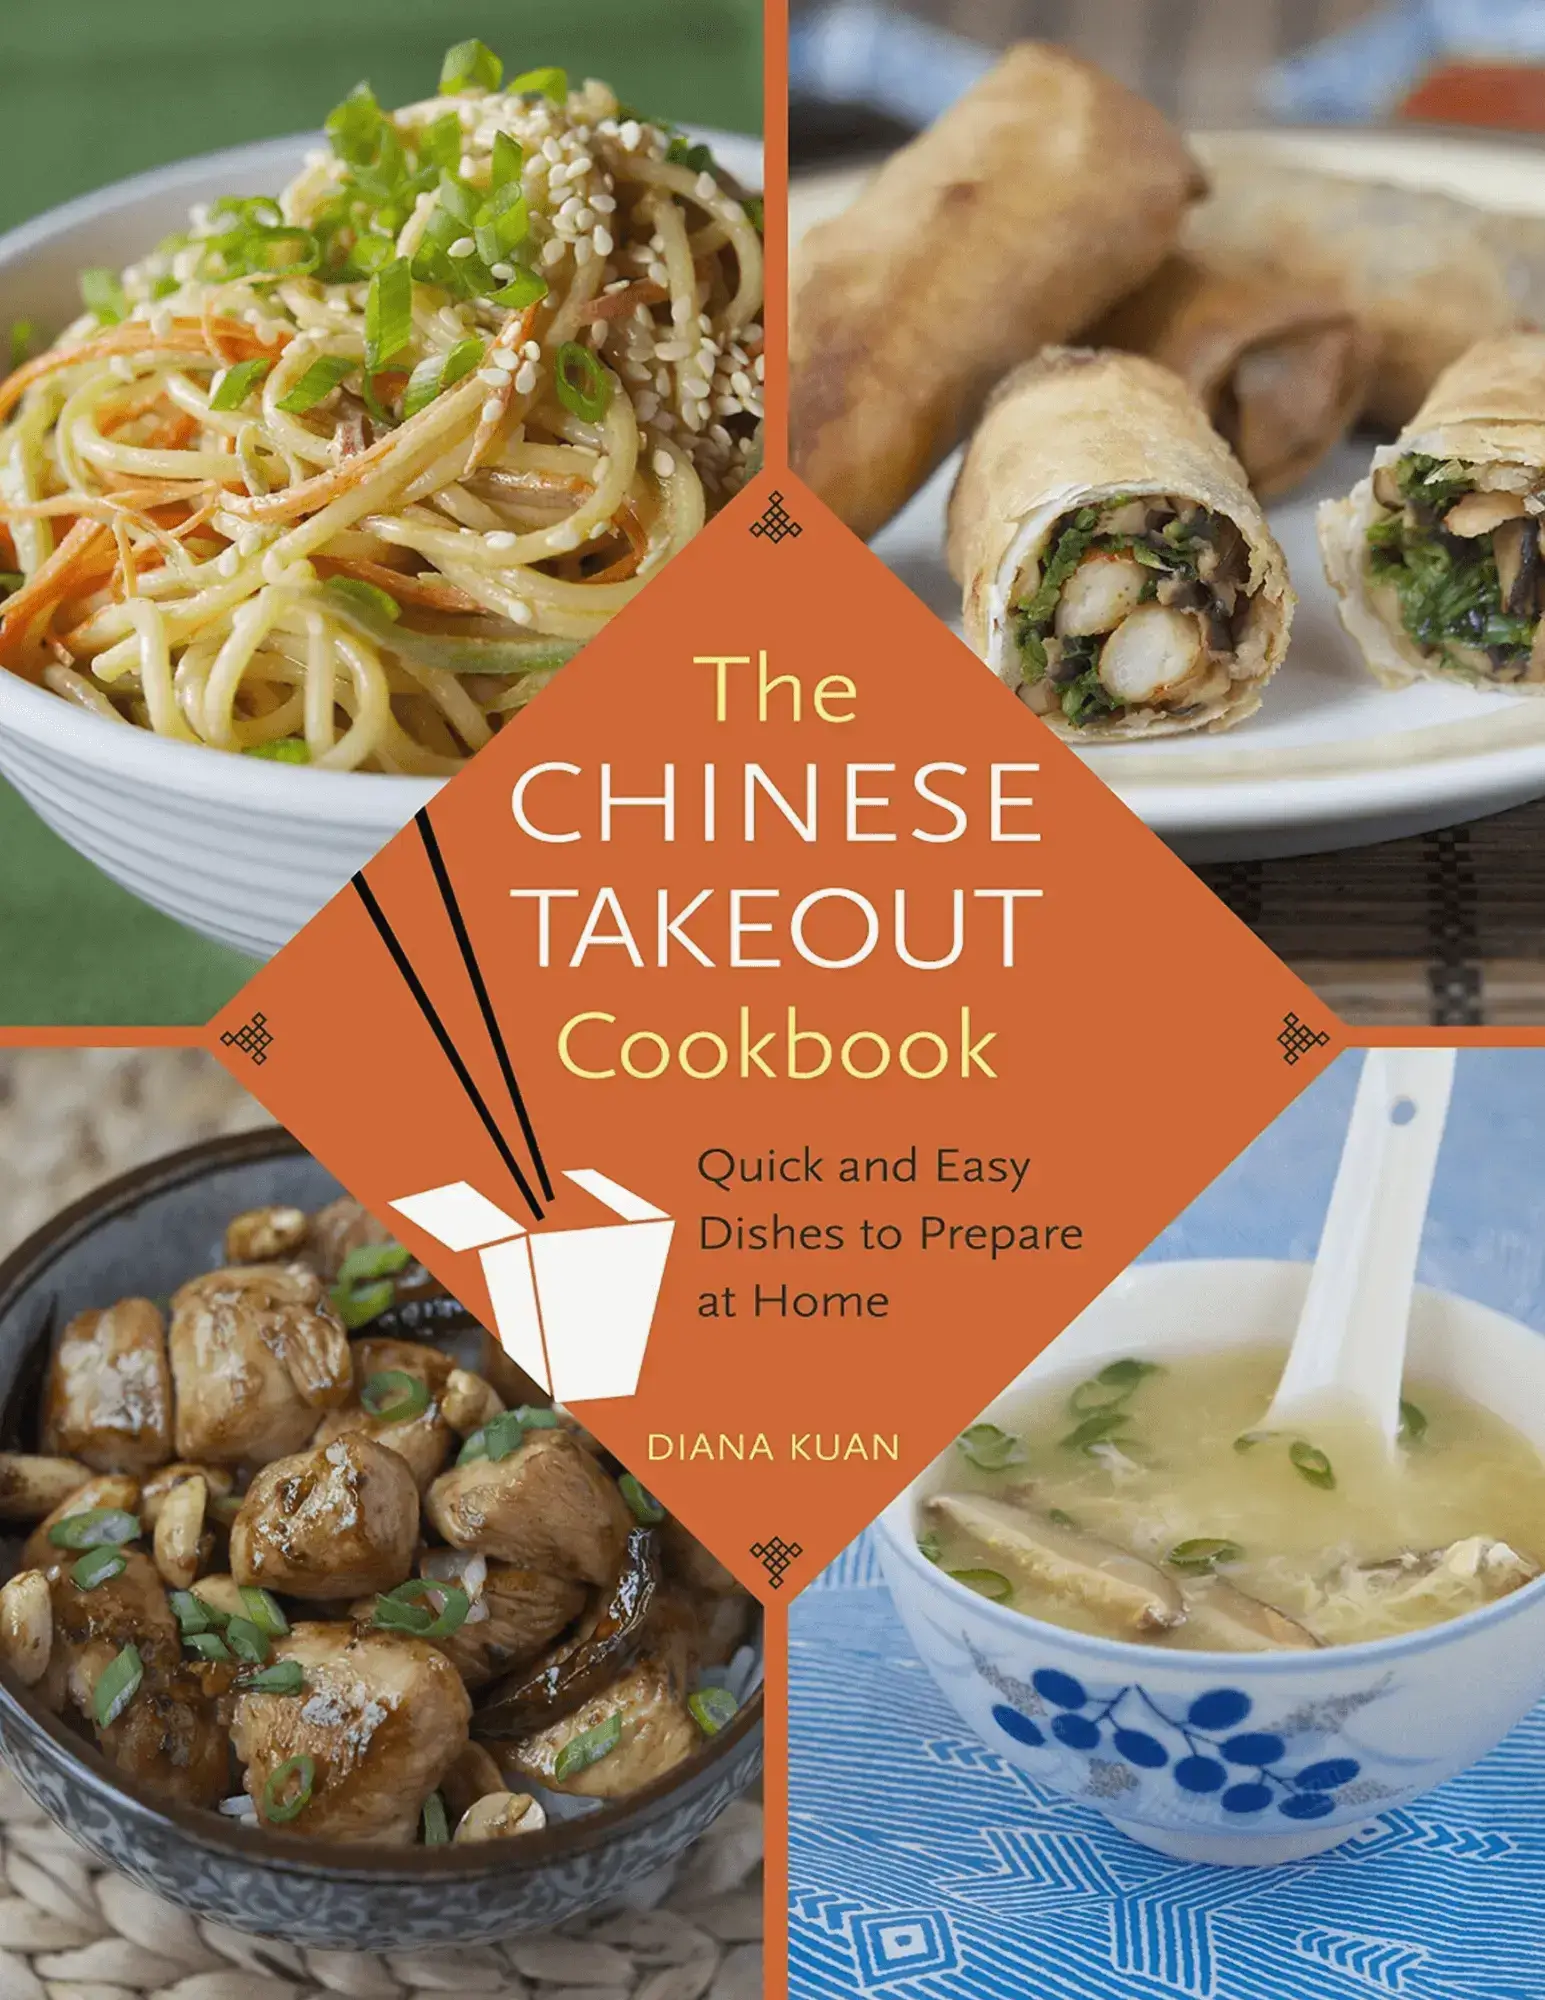 The Chinese Takeout Cookbook